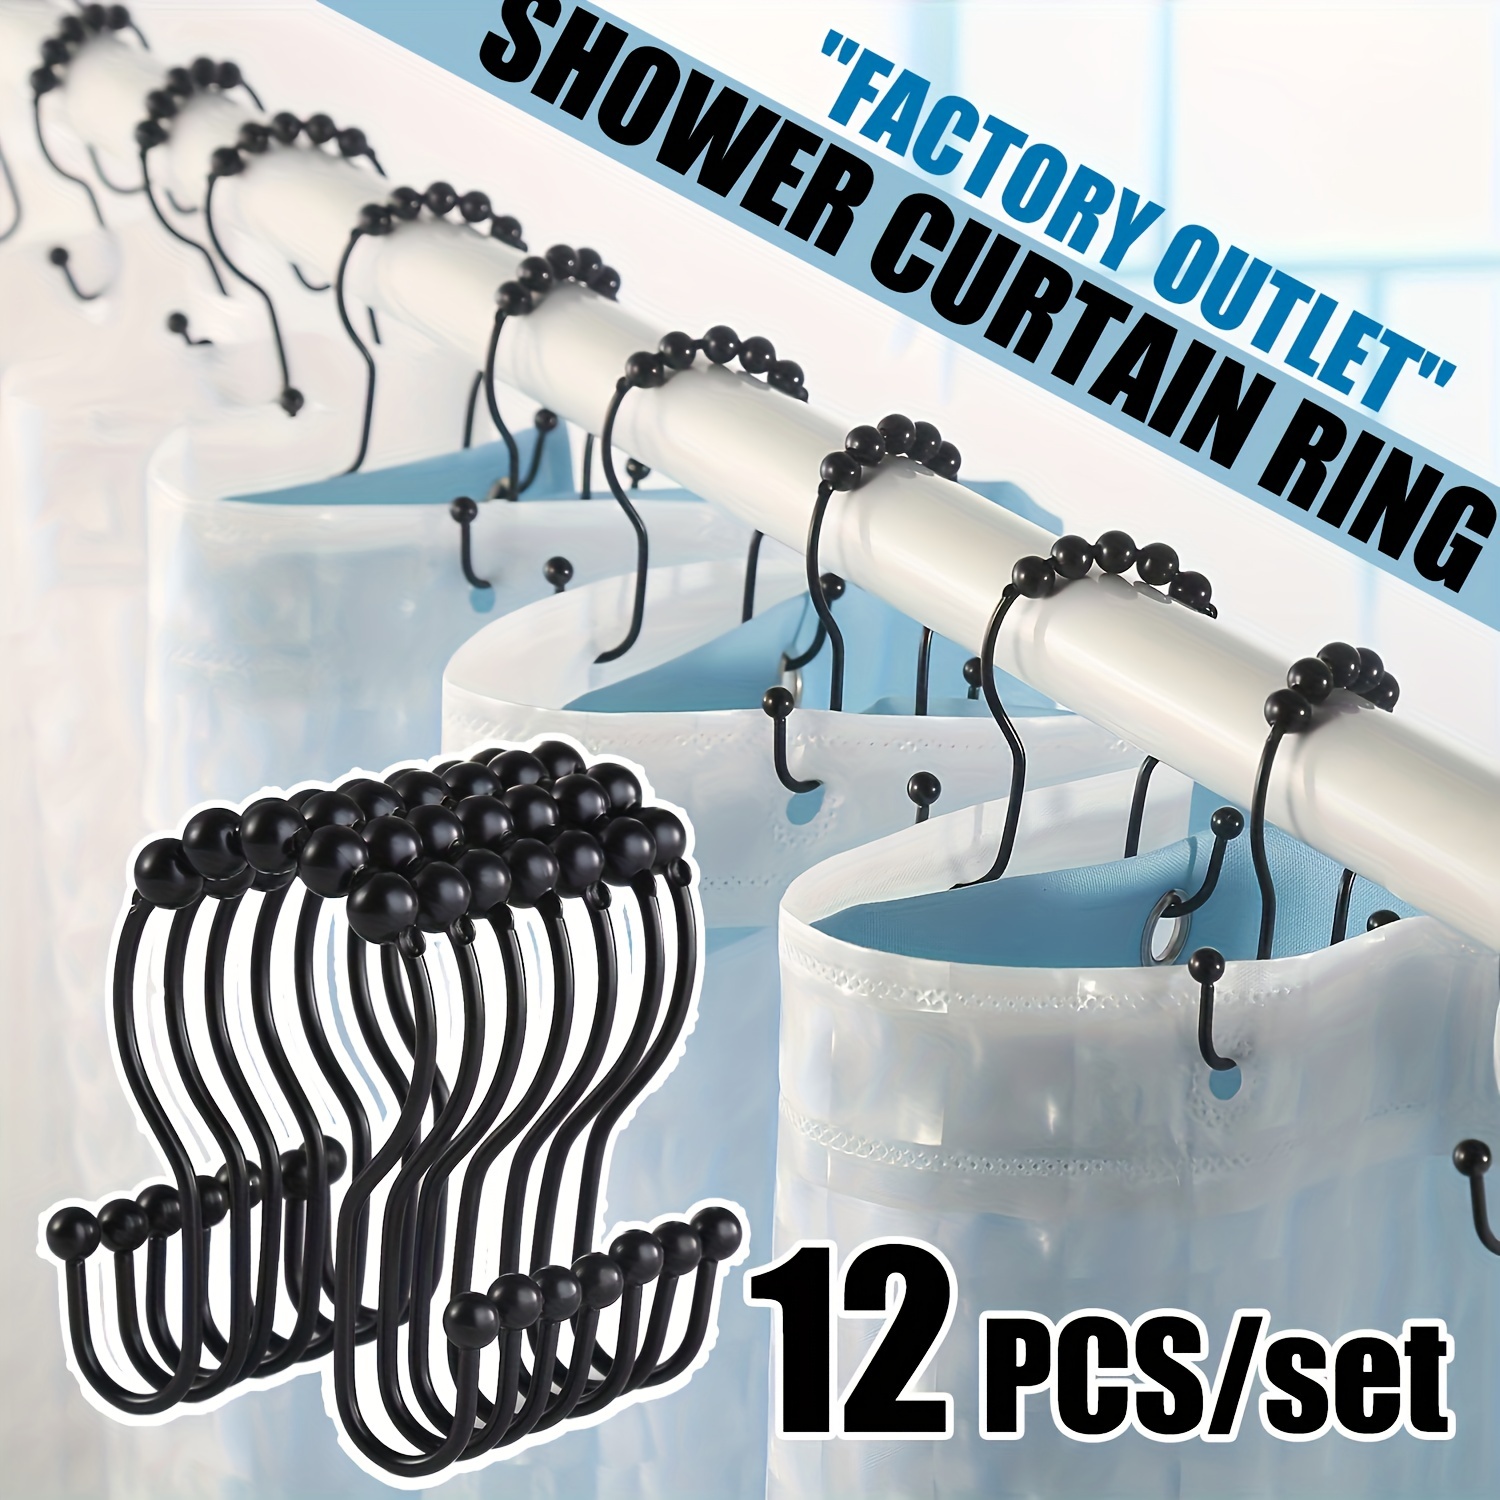 Shower Curtain Rings, Shower Curtain Hooks, Rust Proof Stainless